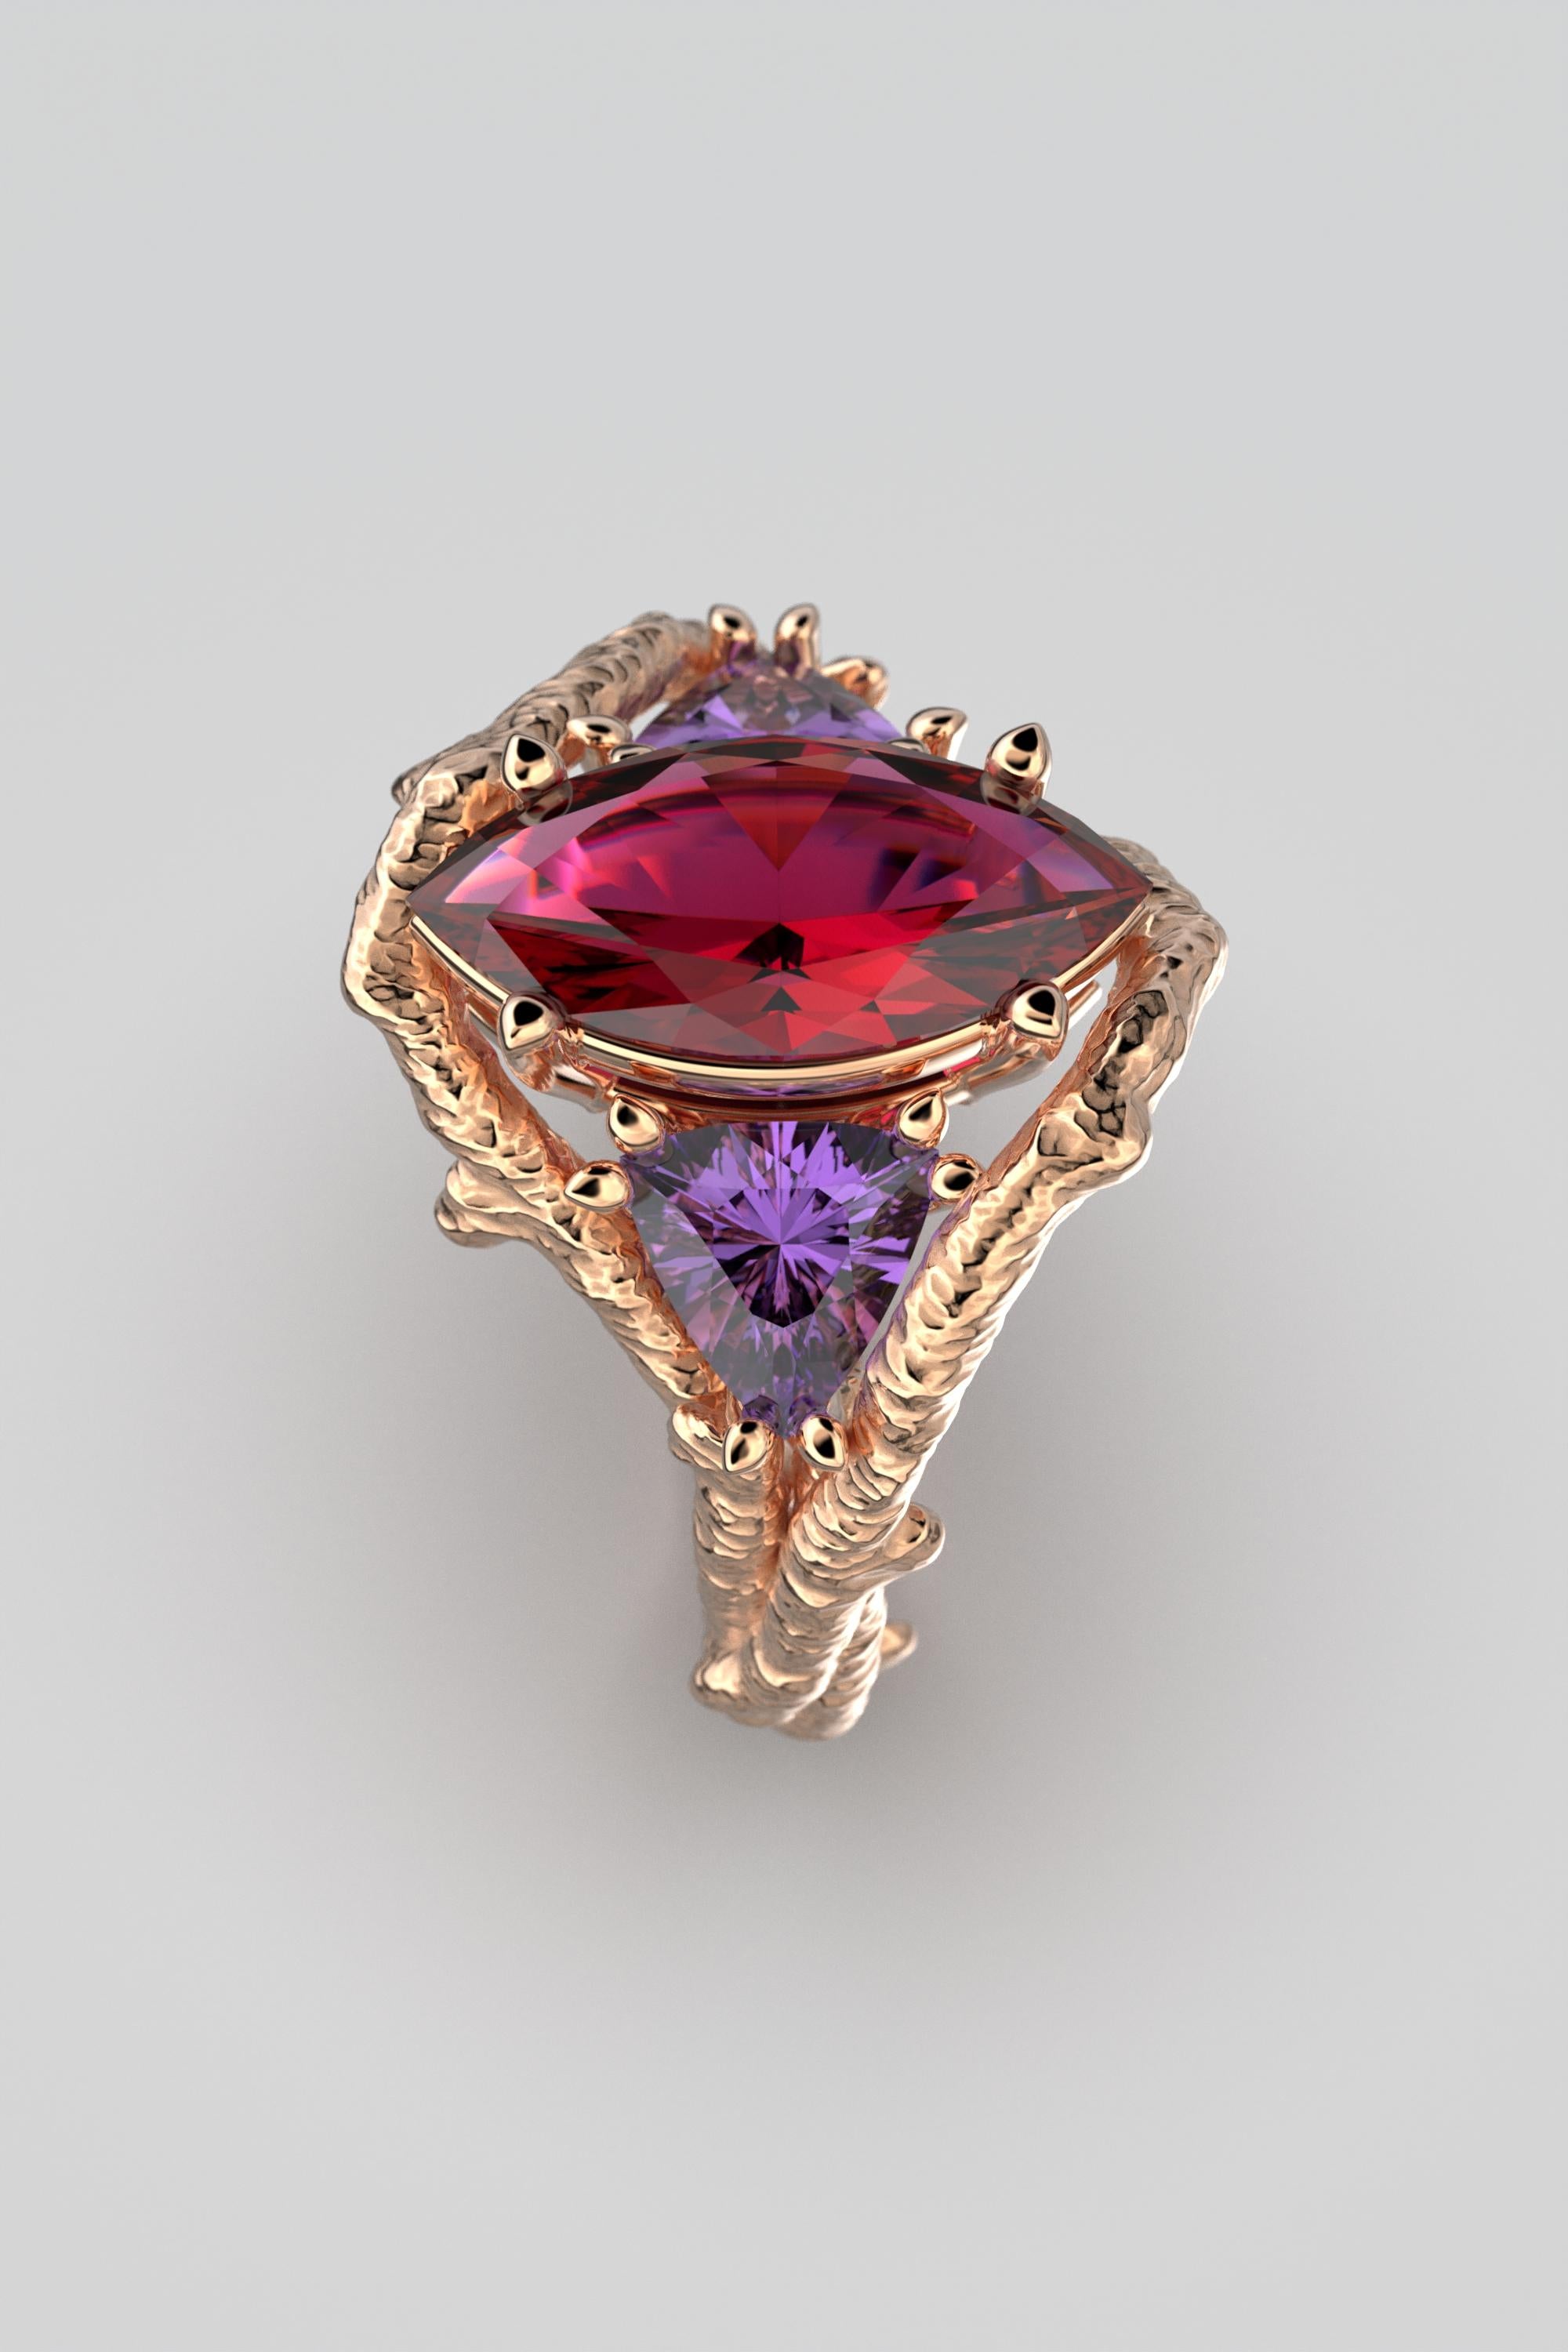 For Sale:  Nature Inspired 18k Solid Gold Gemstone Ring Made in Italy by Oltremare Gioielli 2